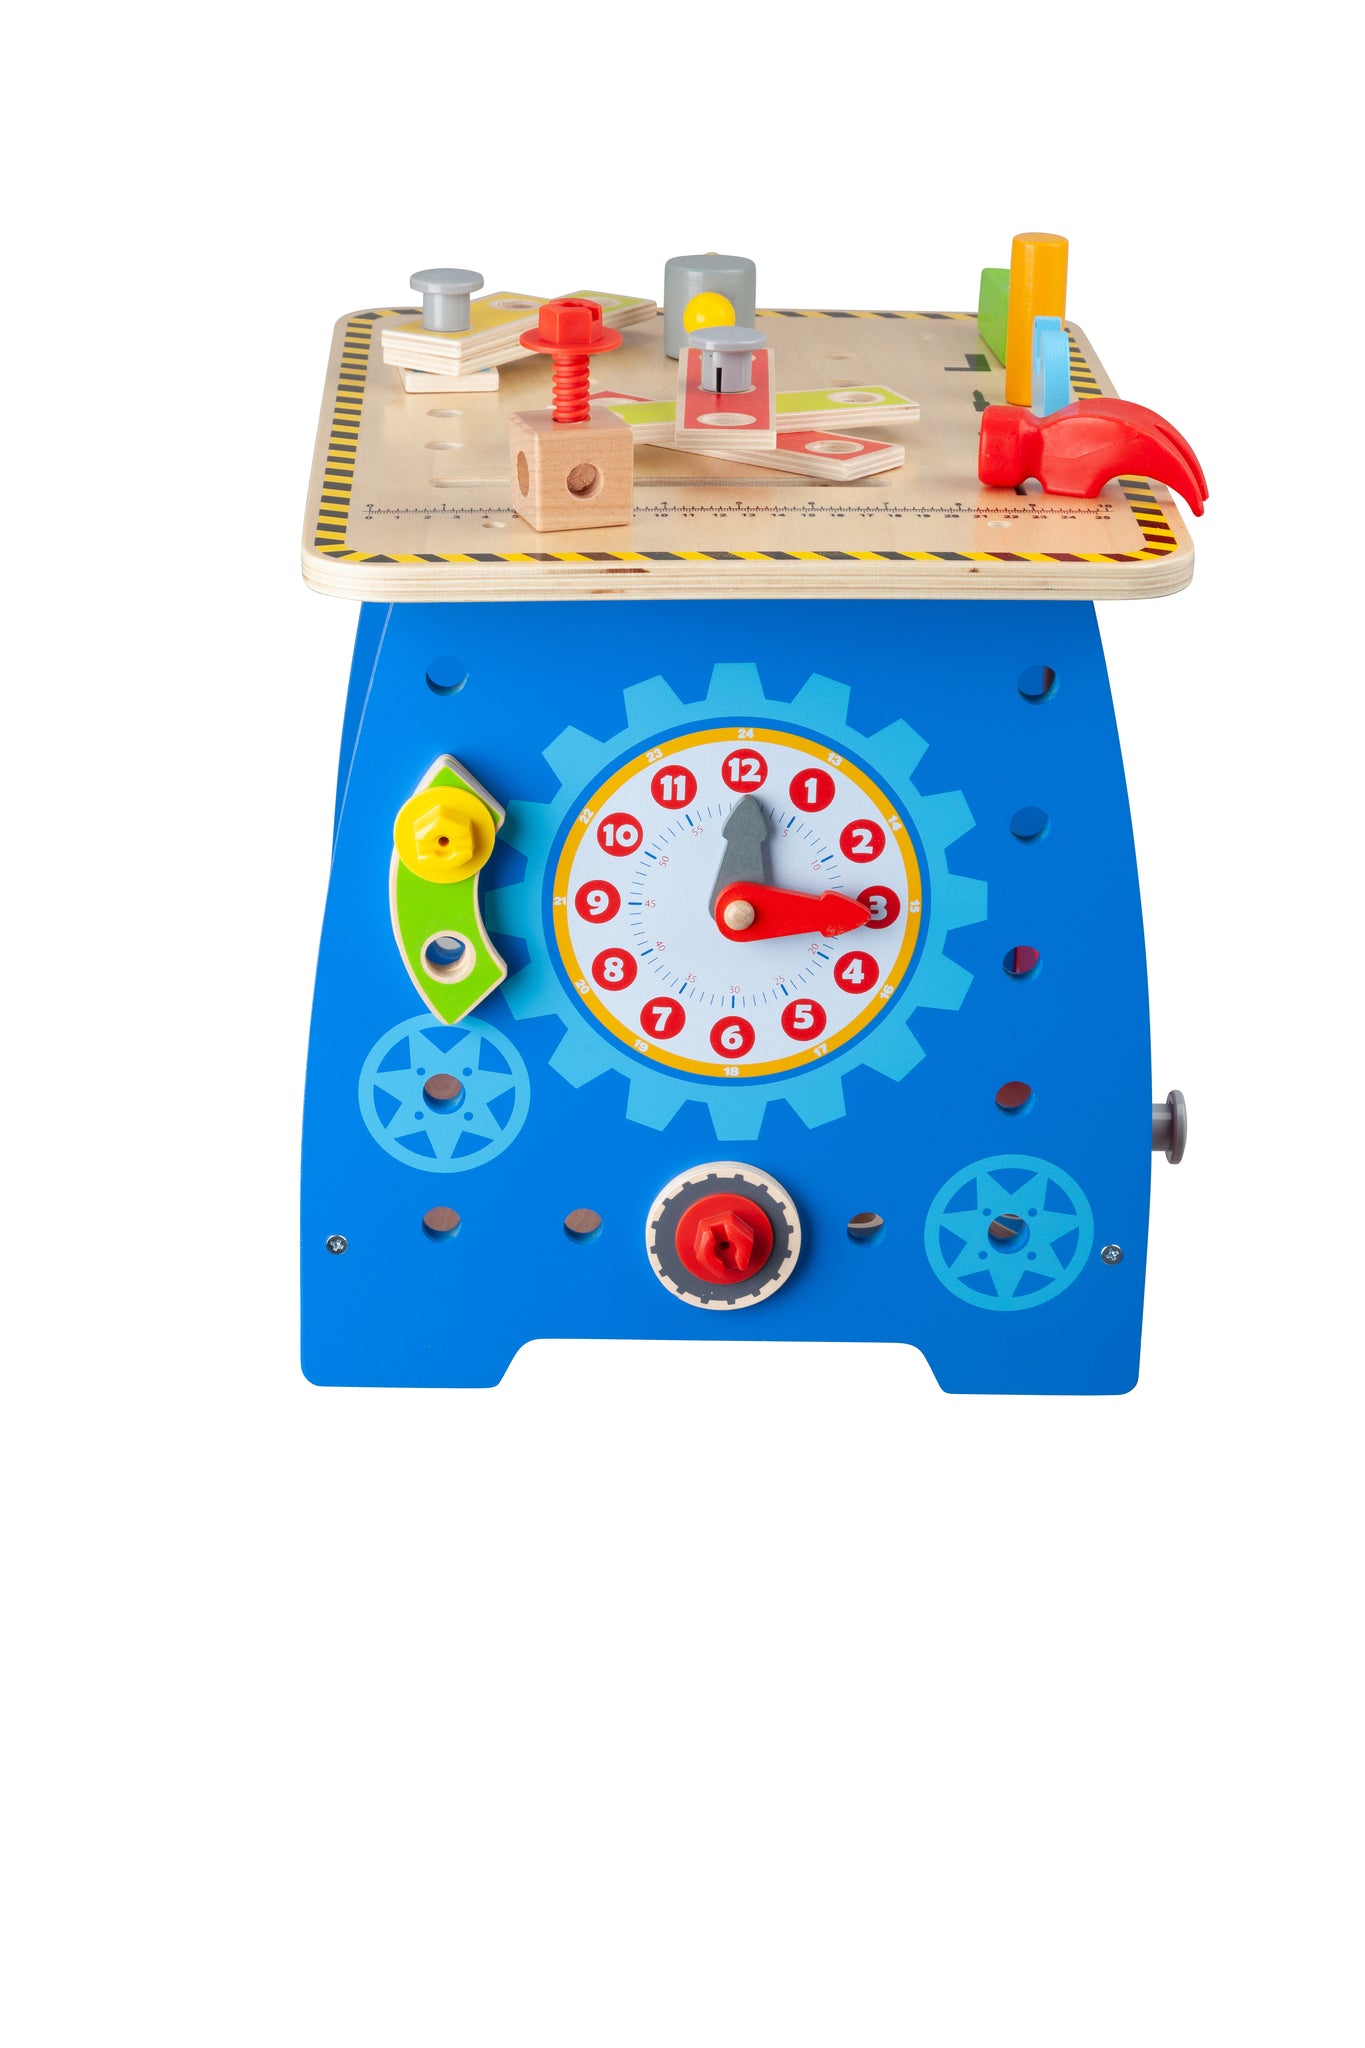 Toysters Wooden Activity Workbench for Toddlers